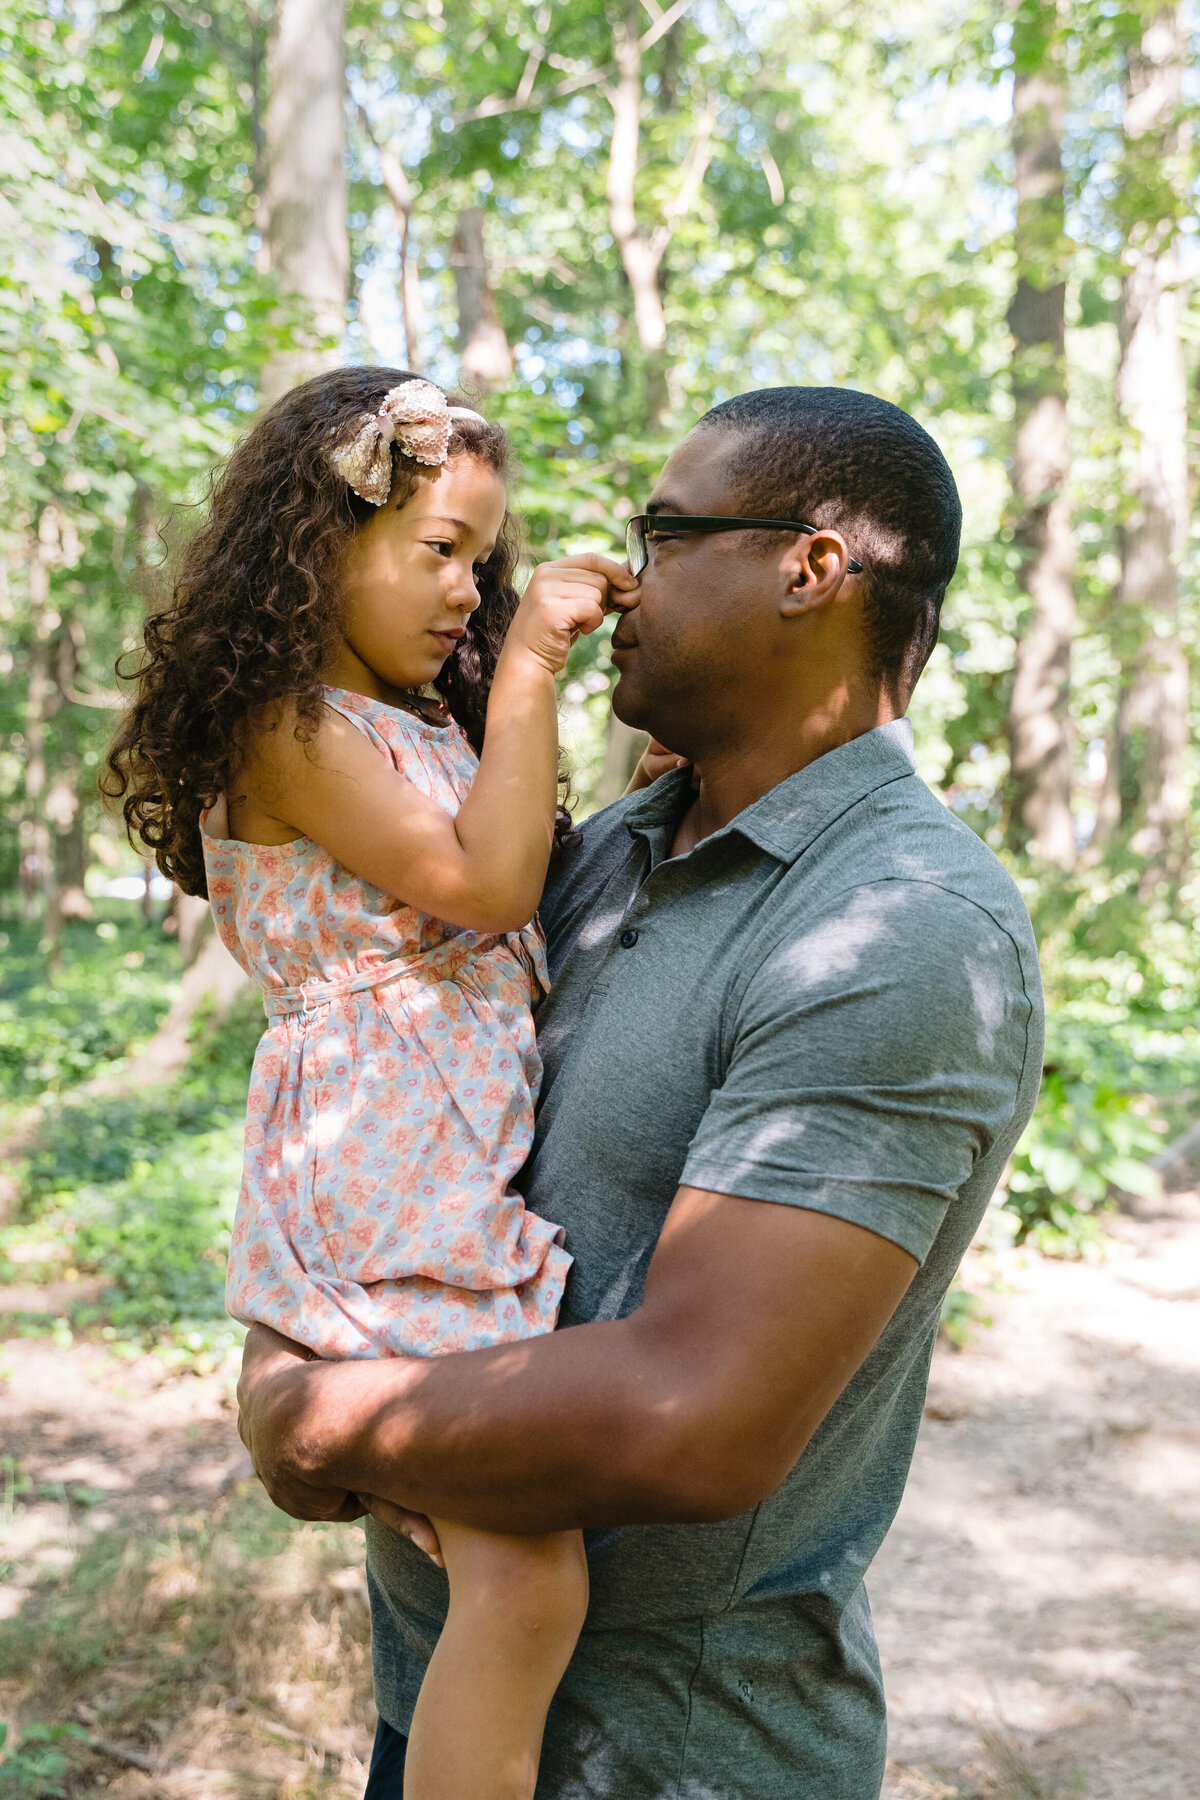 A person holding a small child in their arms as she pinches their nose while they stand in a wooded area.